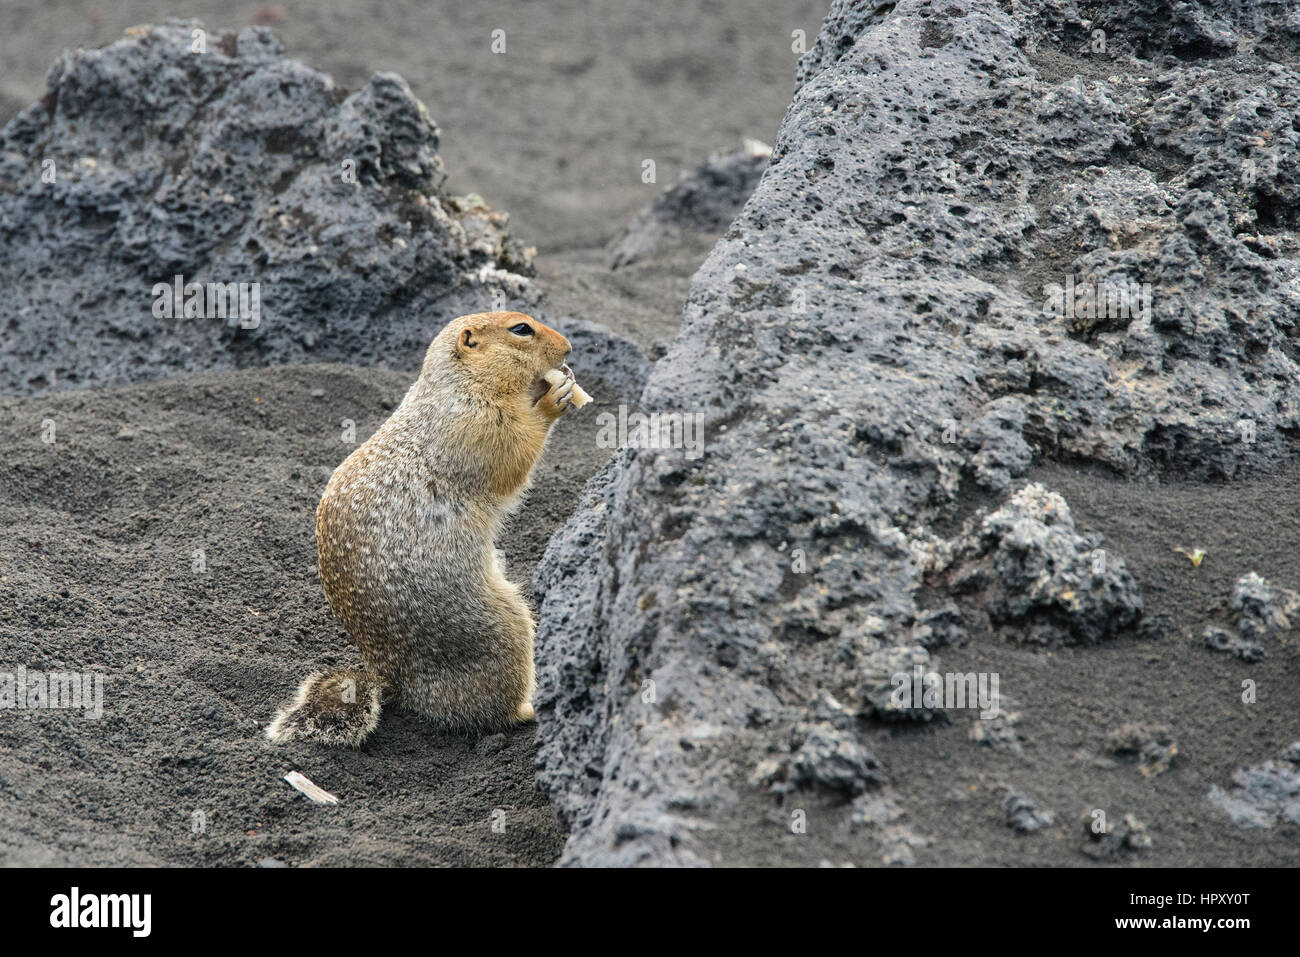 Ground squirrel in Kamchatka eating cheese Stock Photo